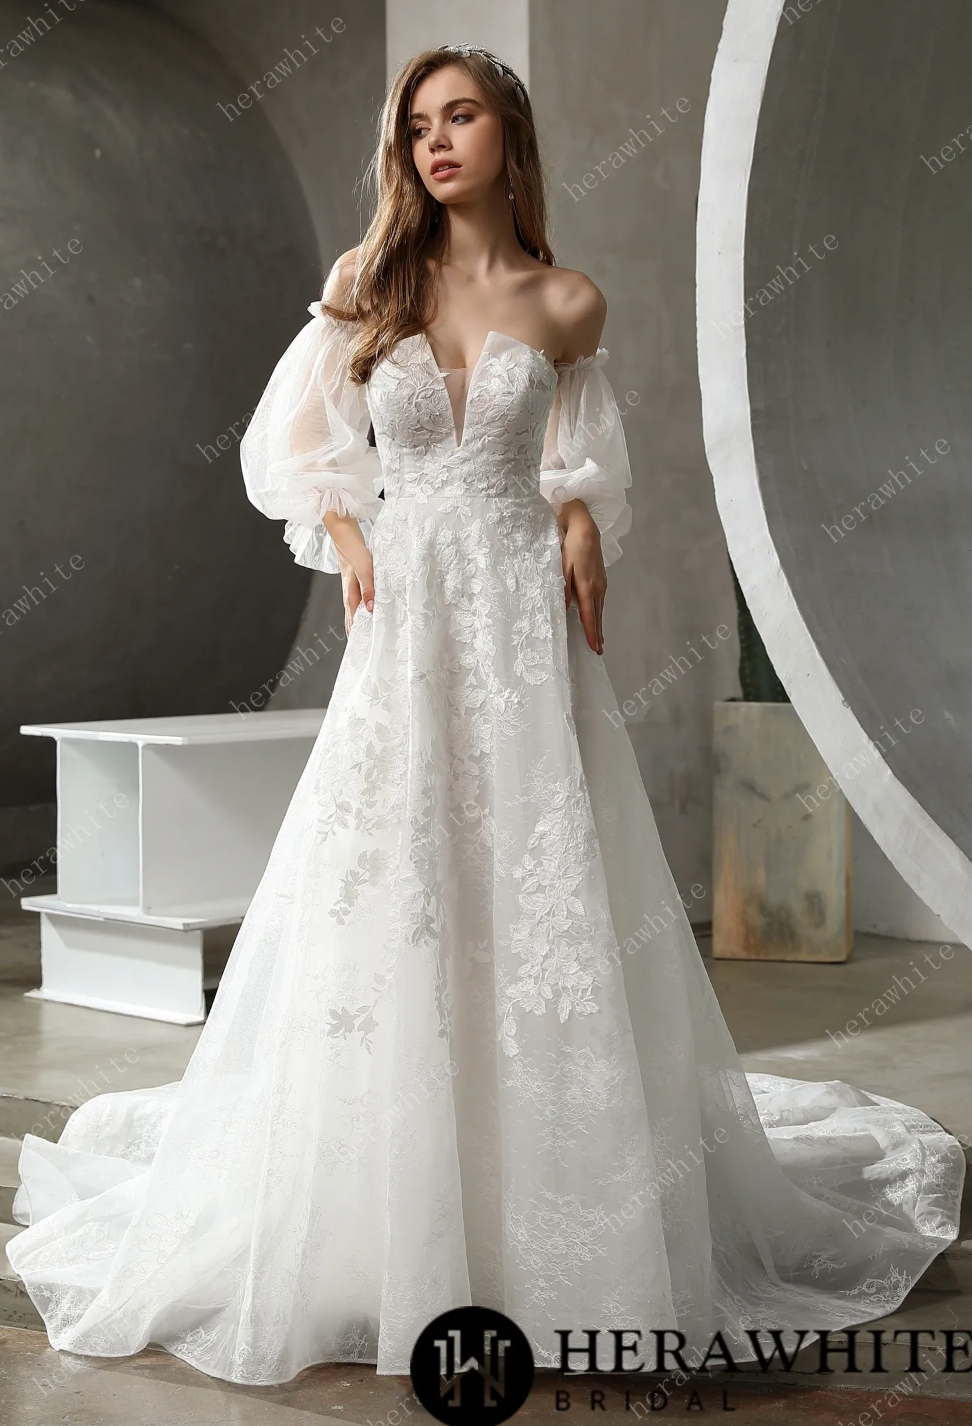 Jumpsuit Wedding Dress With Detachable Skirt Beaded Lace Bridal Gowns –  TulleLux Bridal Crowns & Accessories